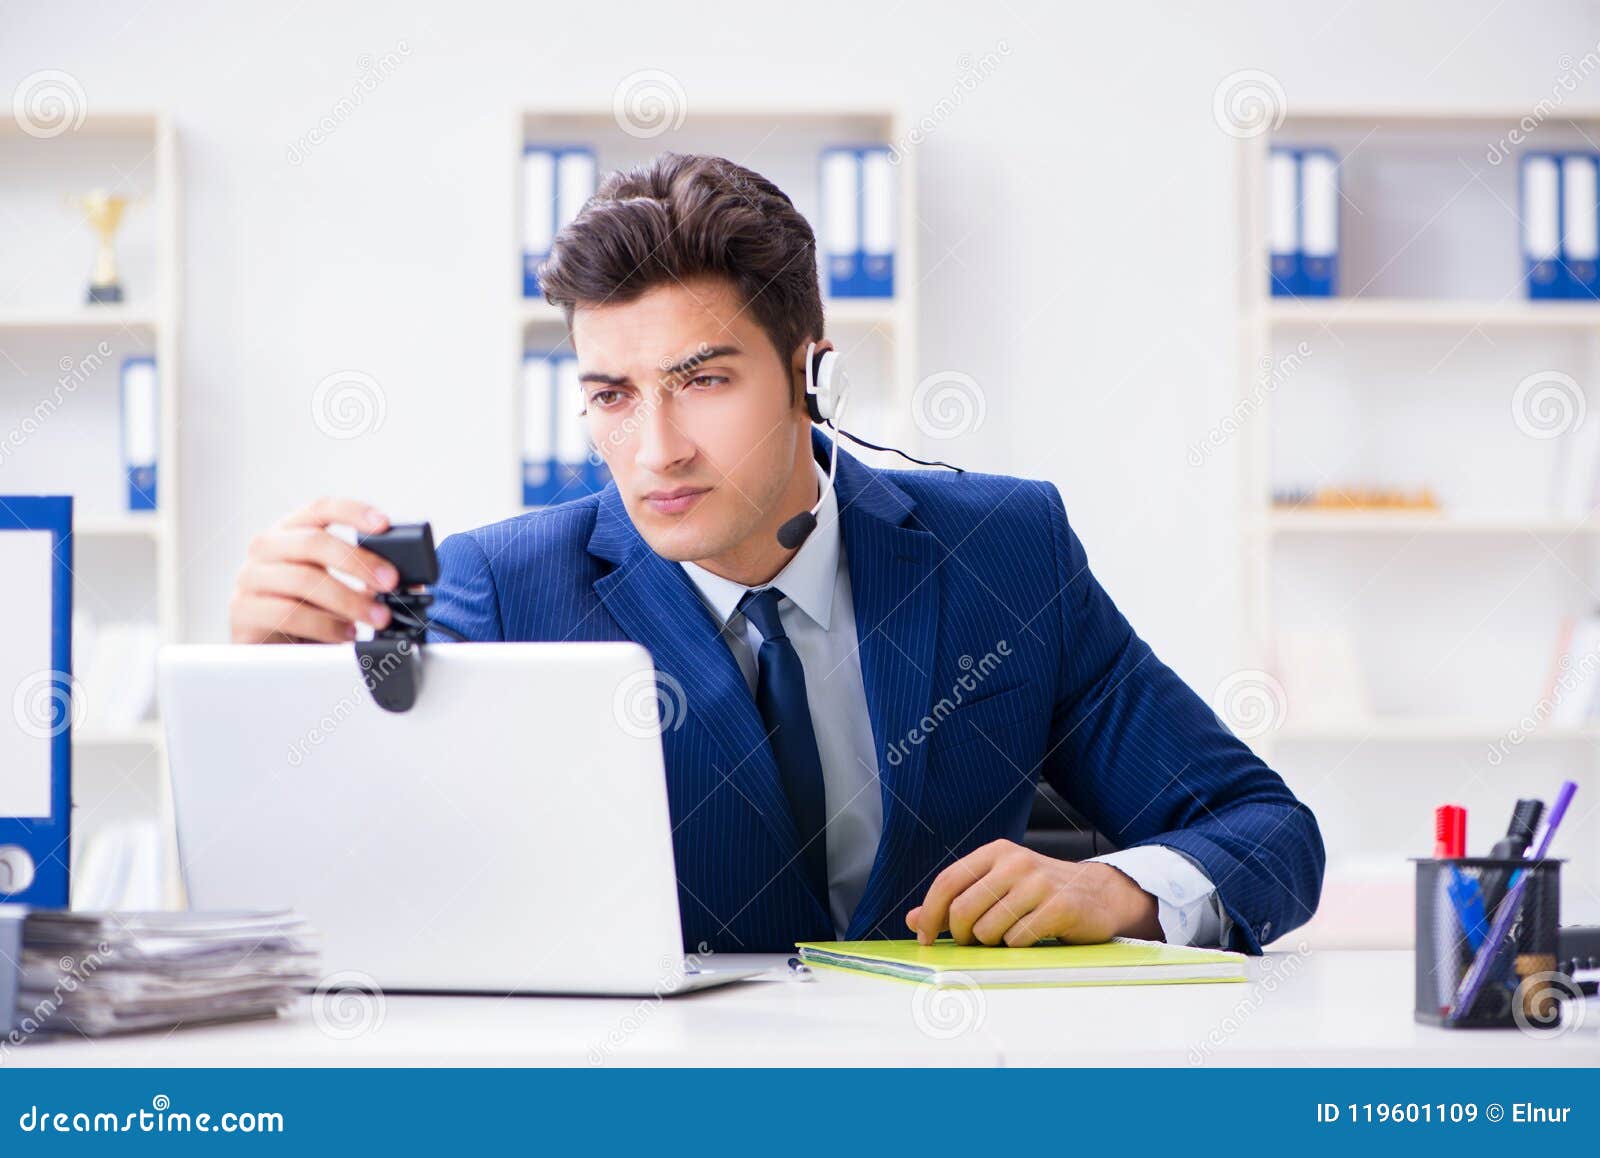 The Young Help Desk Operator Working In Office Stock Image Image